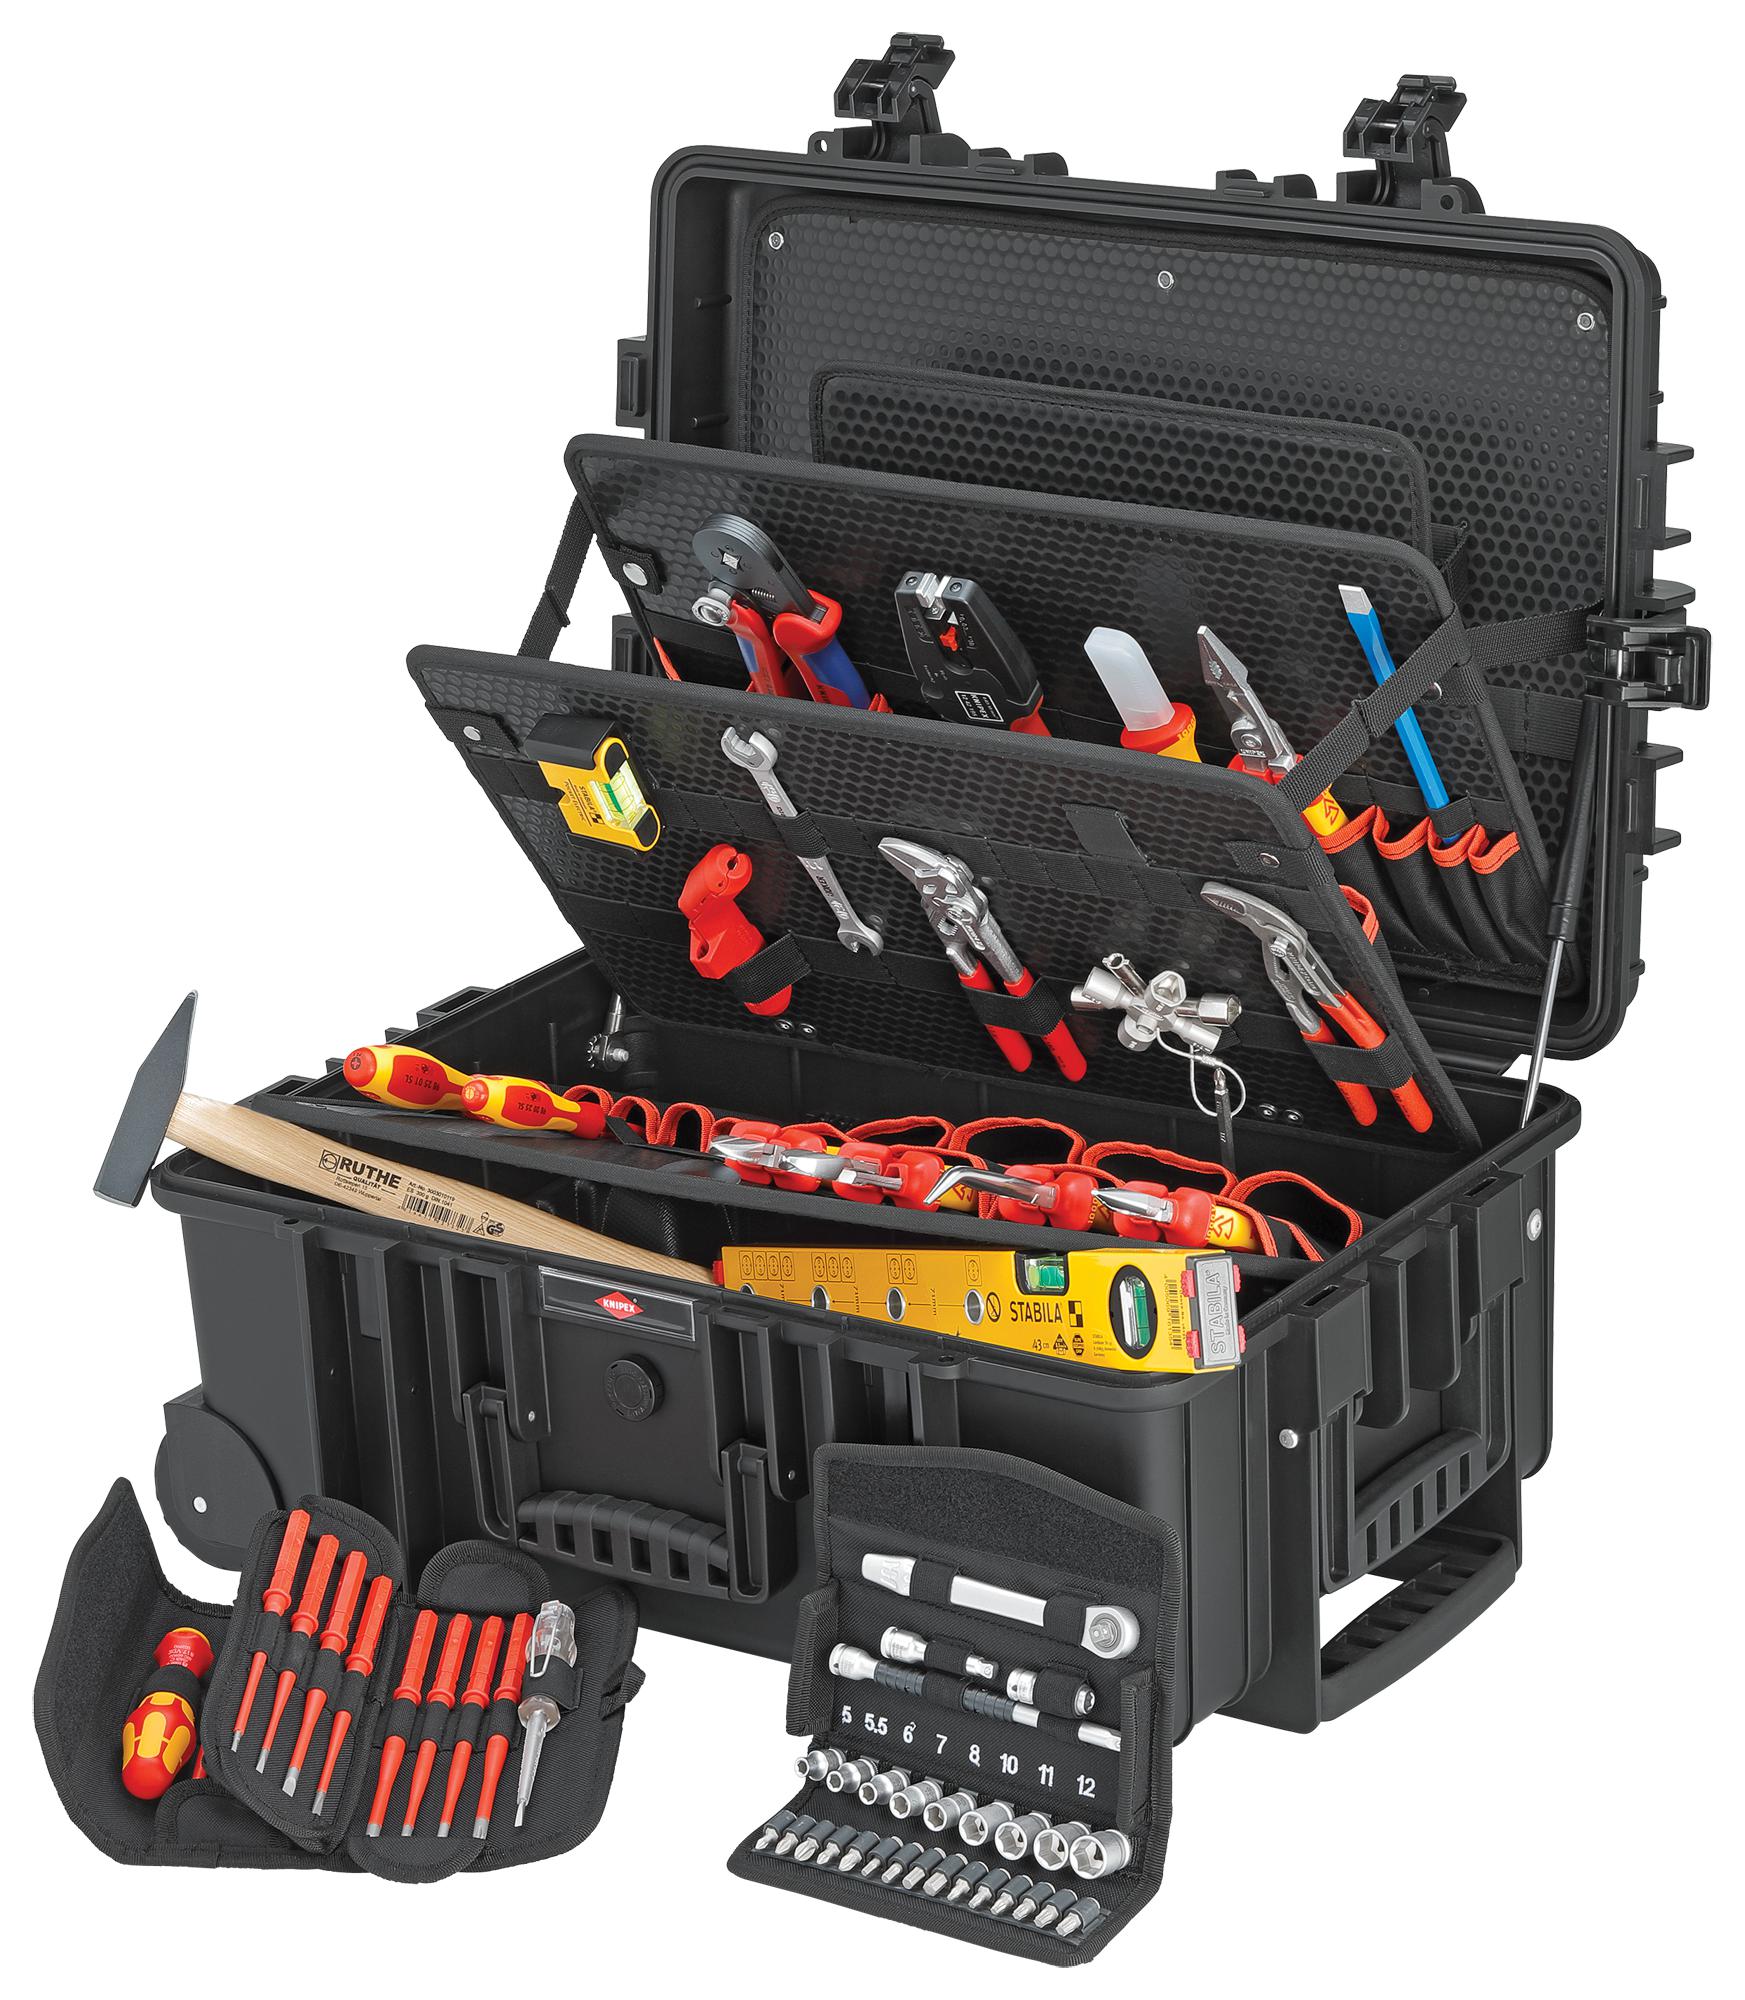 00 21 37 ELECTRICAL TOOL KIT, ROBUST45, 63PC KNIPEX